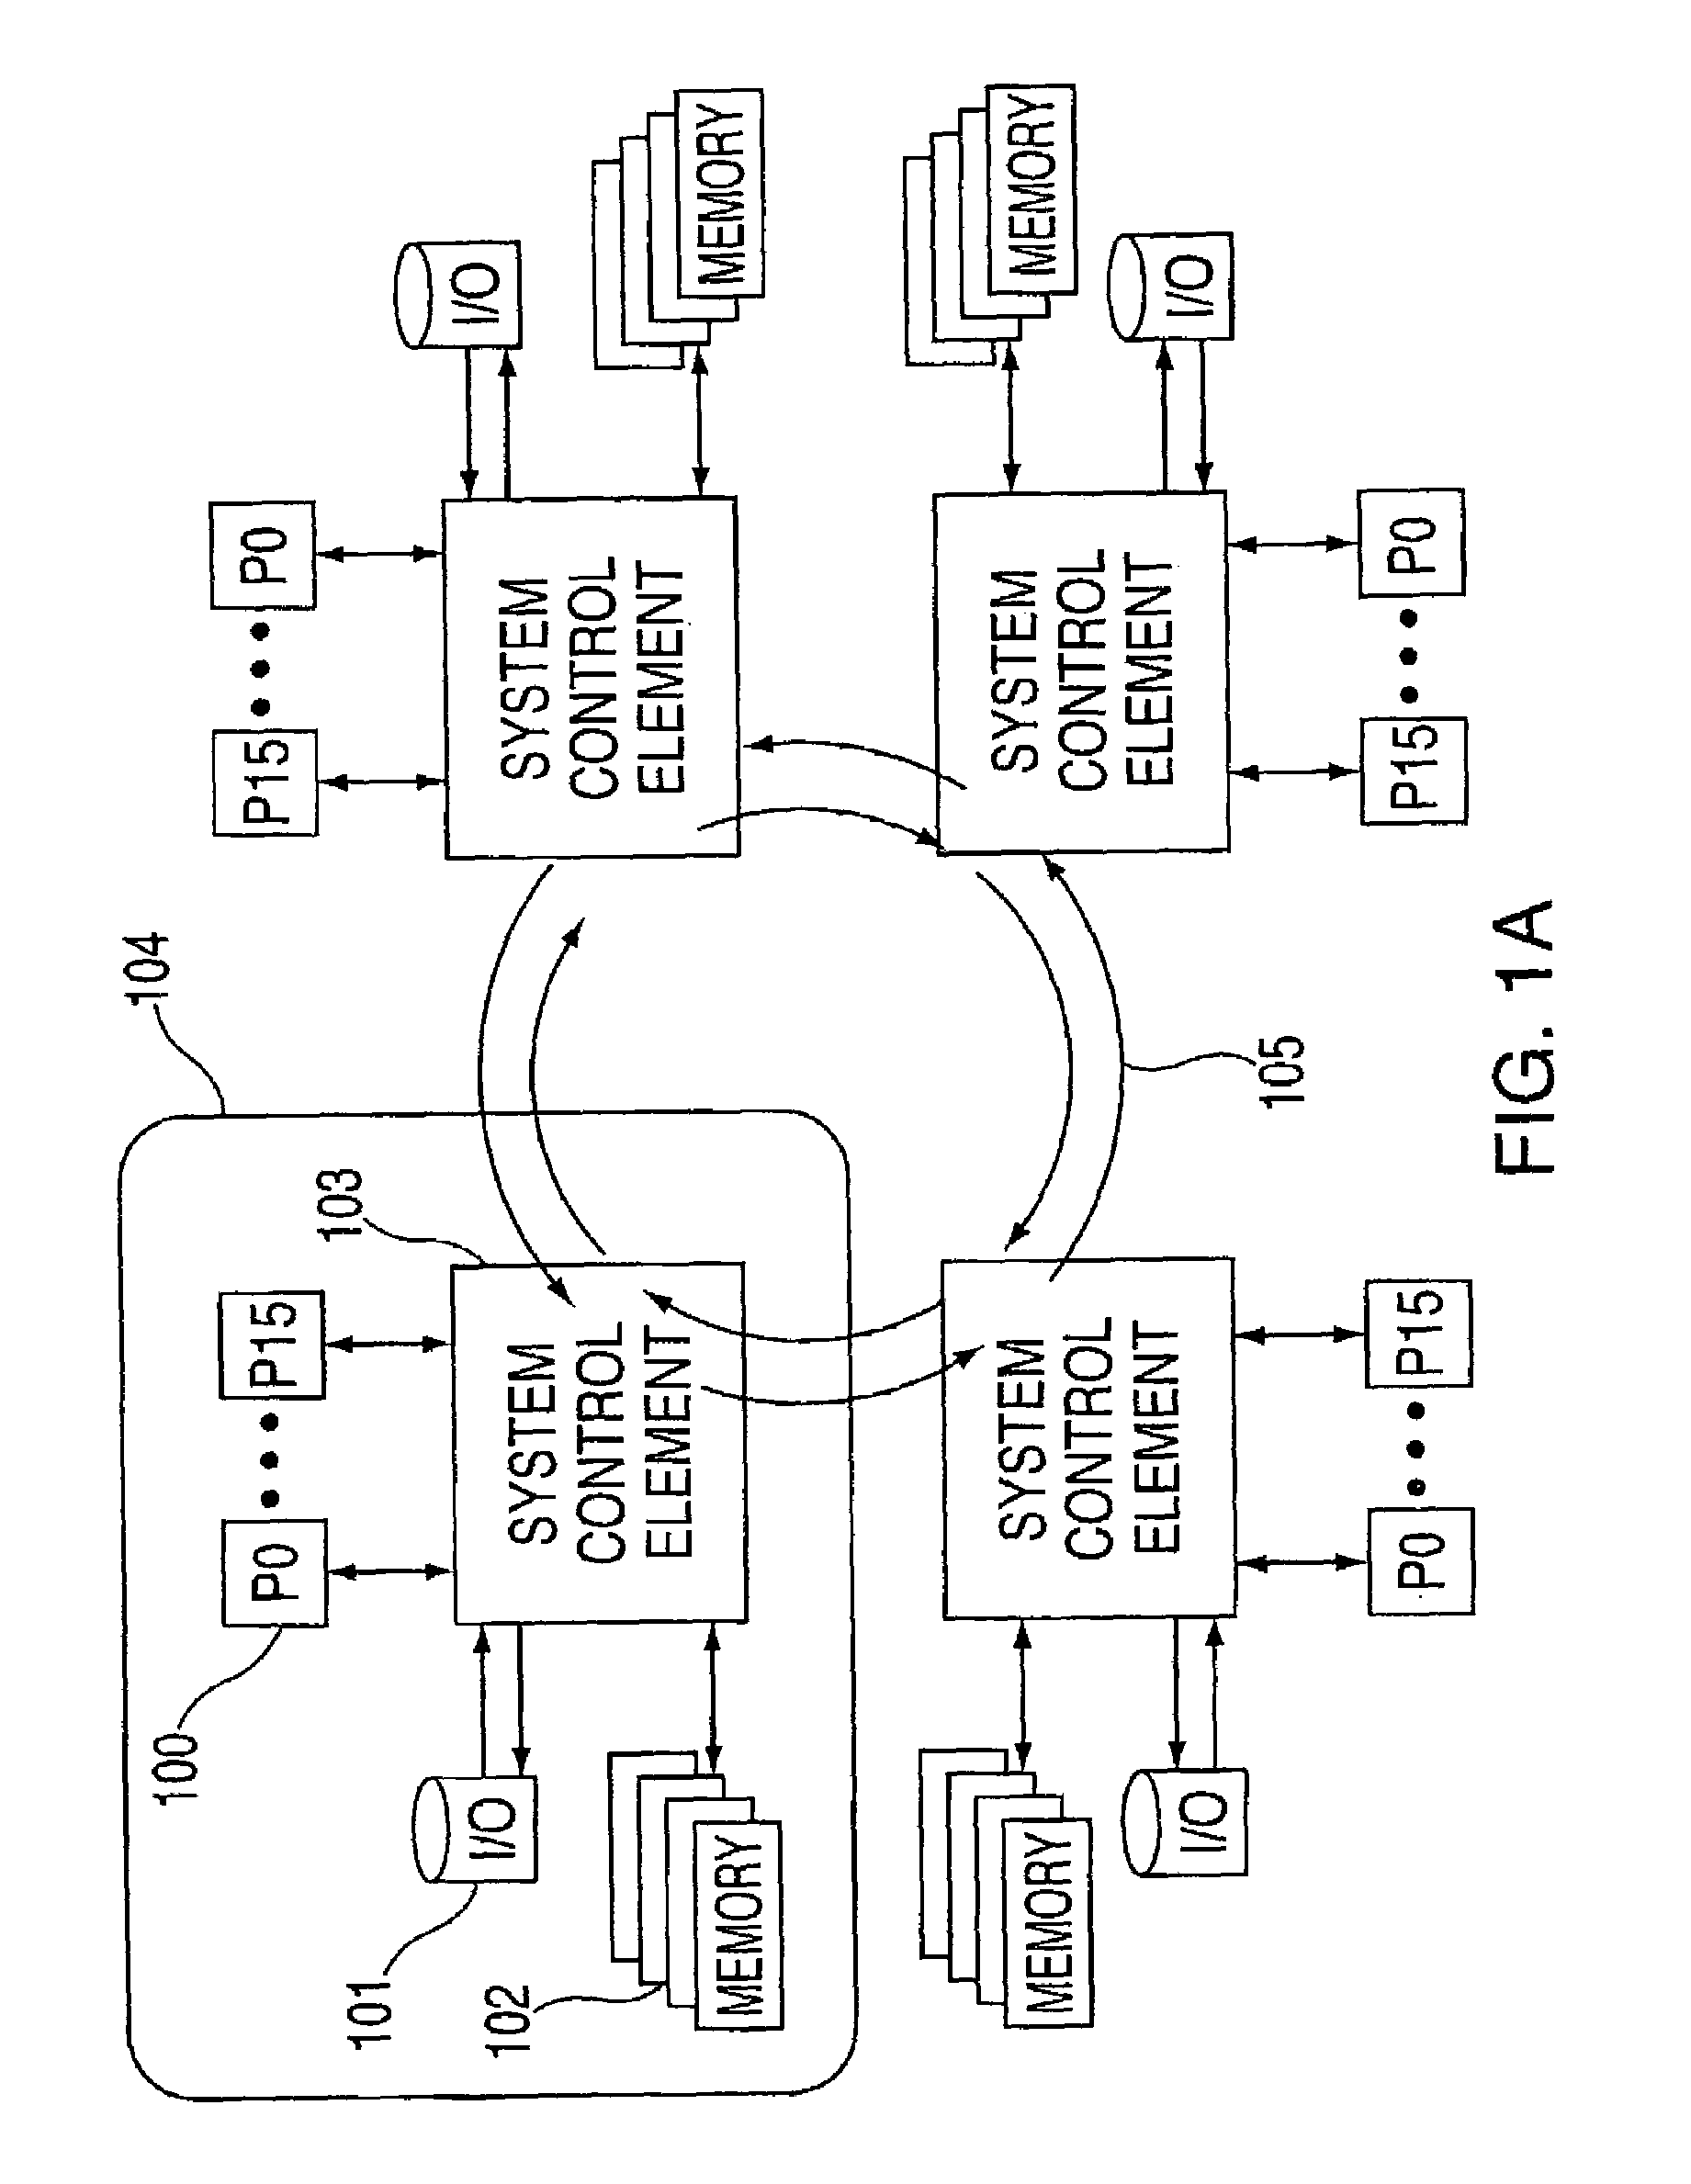 Coherency management for a "switchless" distributed shared memory computer system